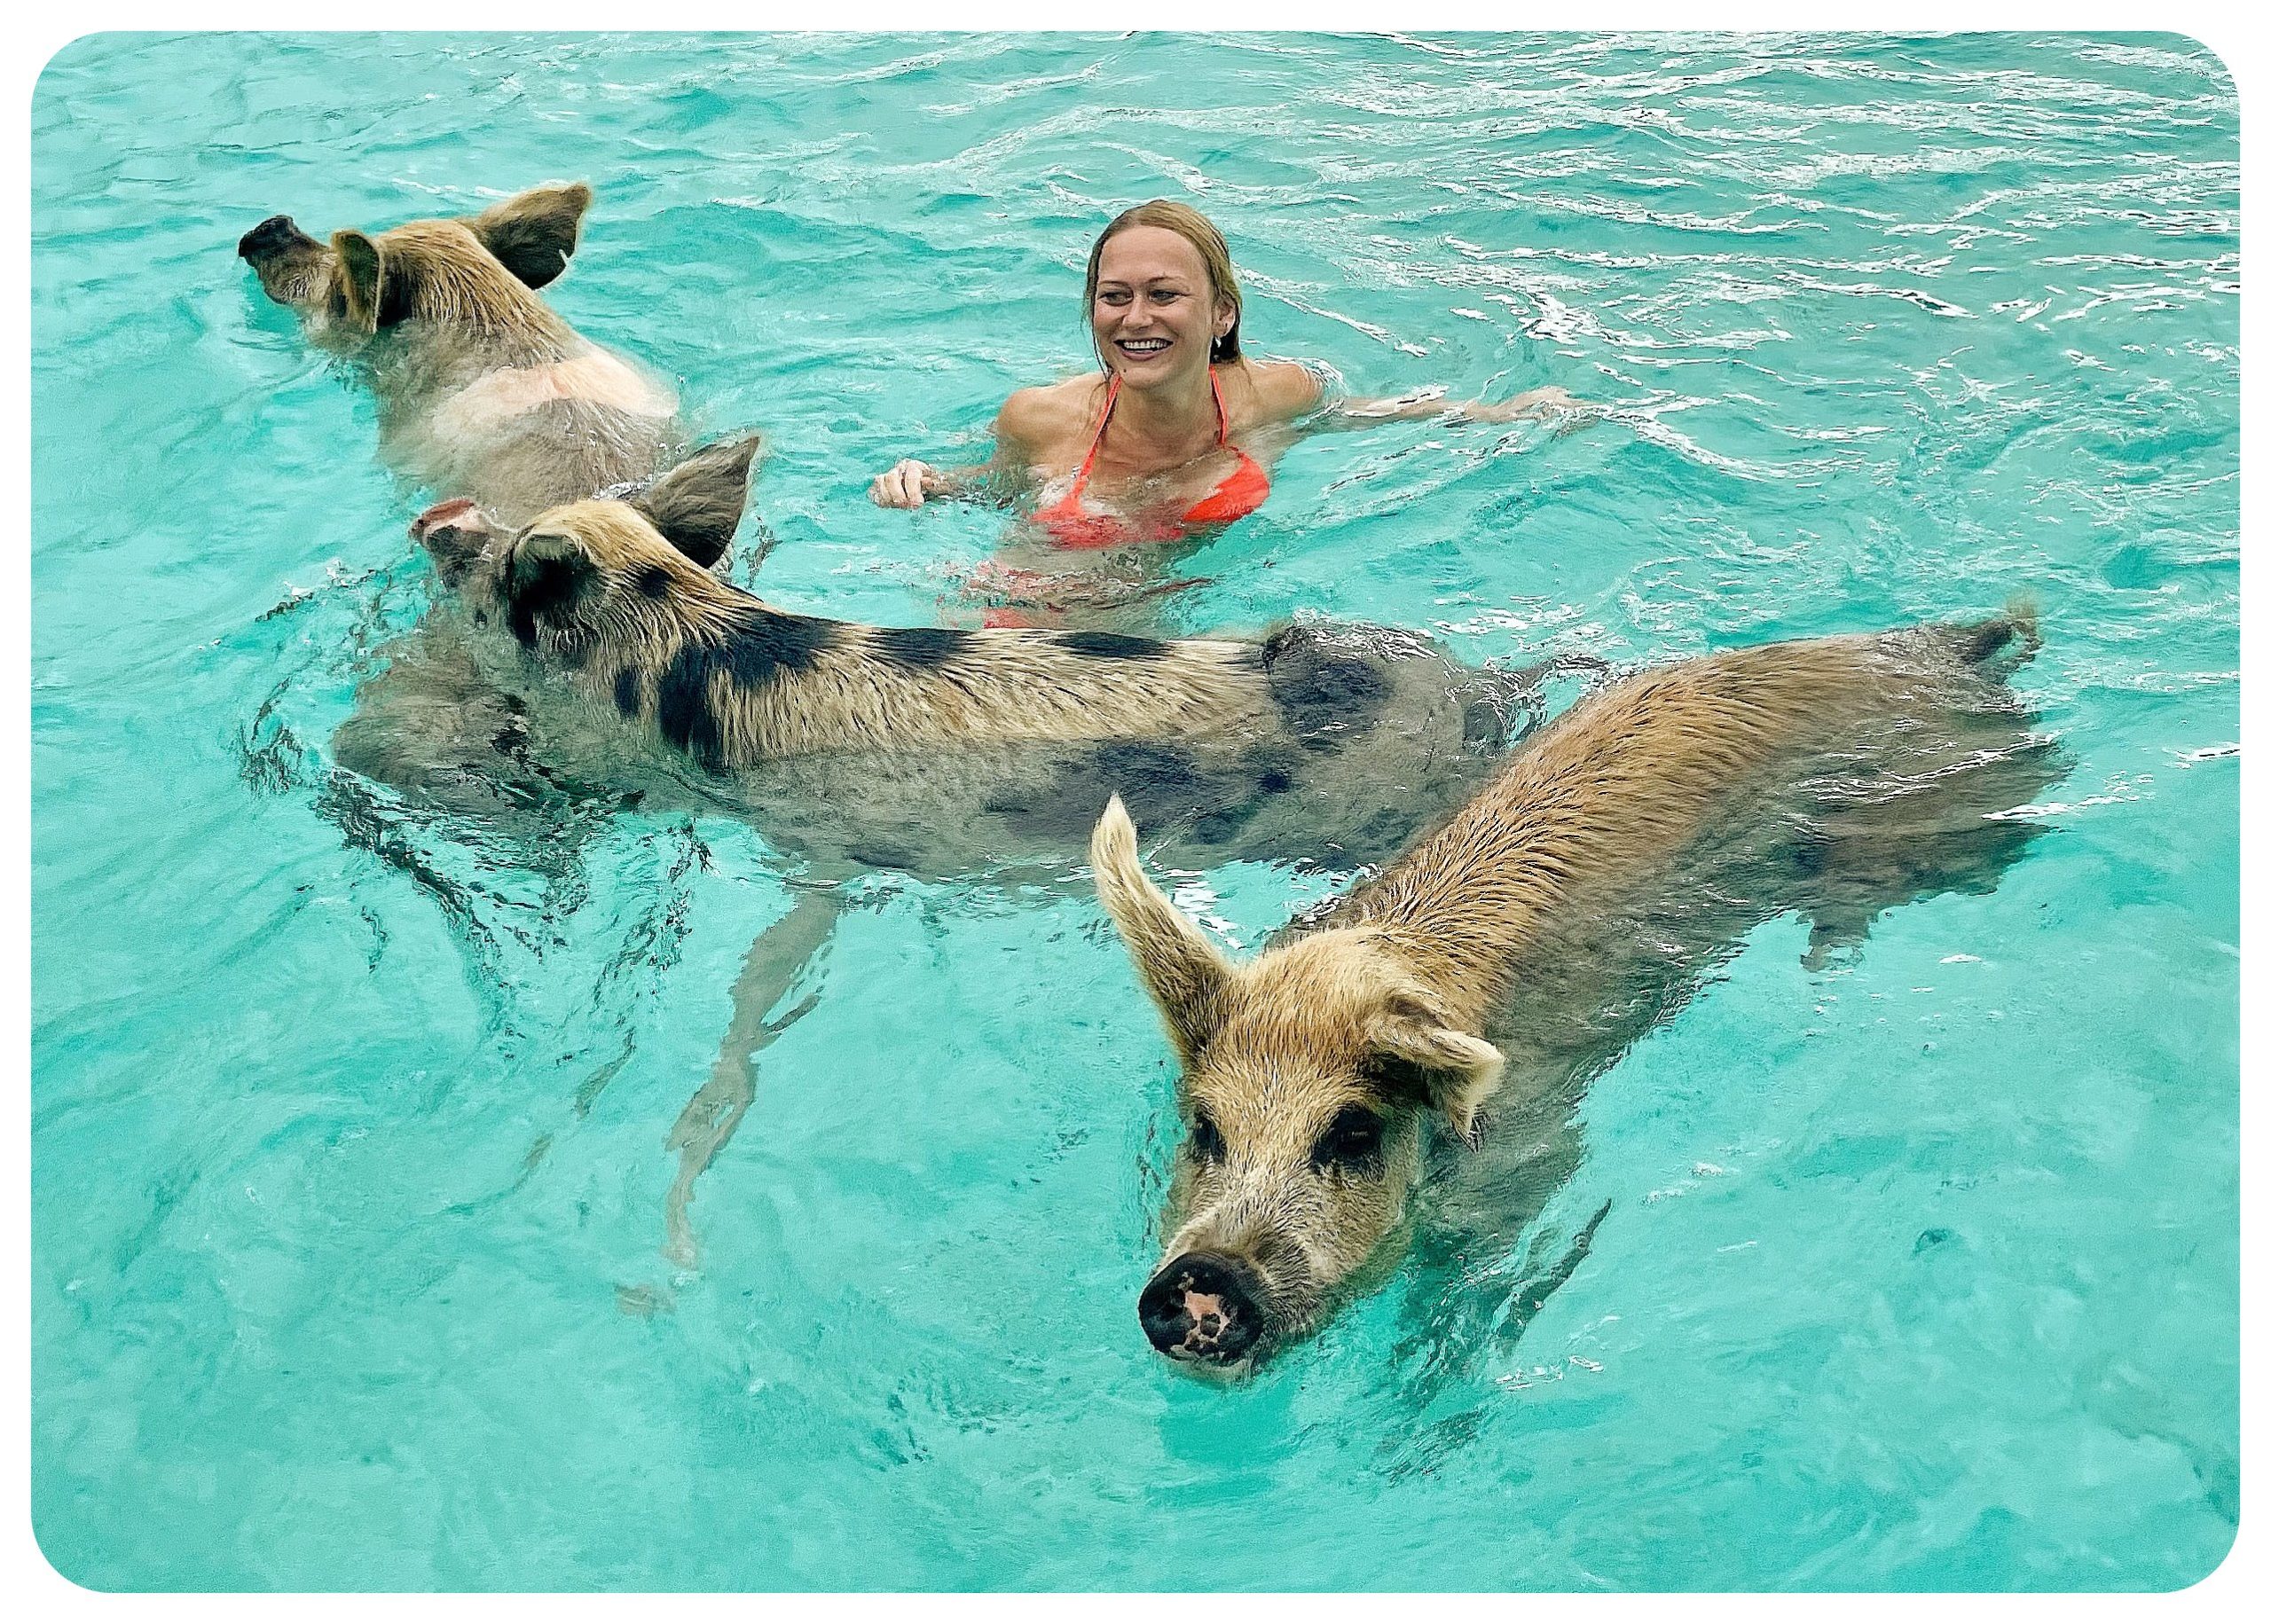 swimming-with-pigs-big-mayor-cay2-scaled.jpg